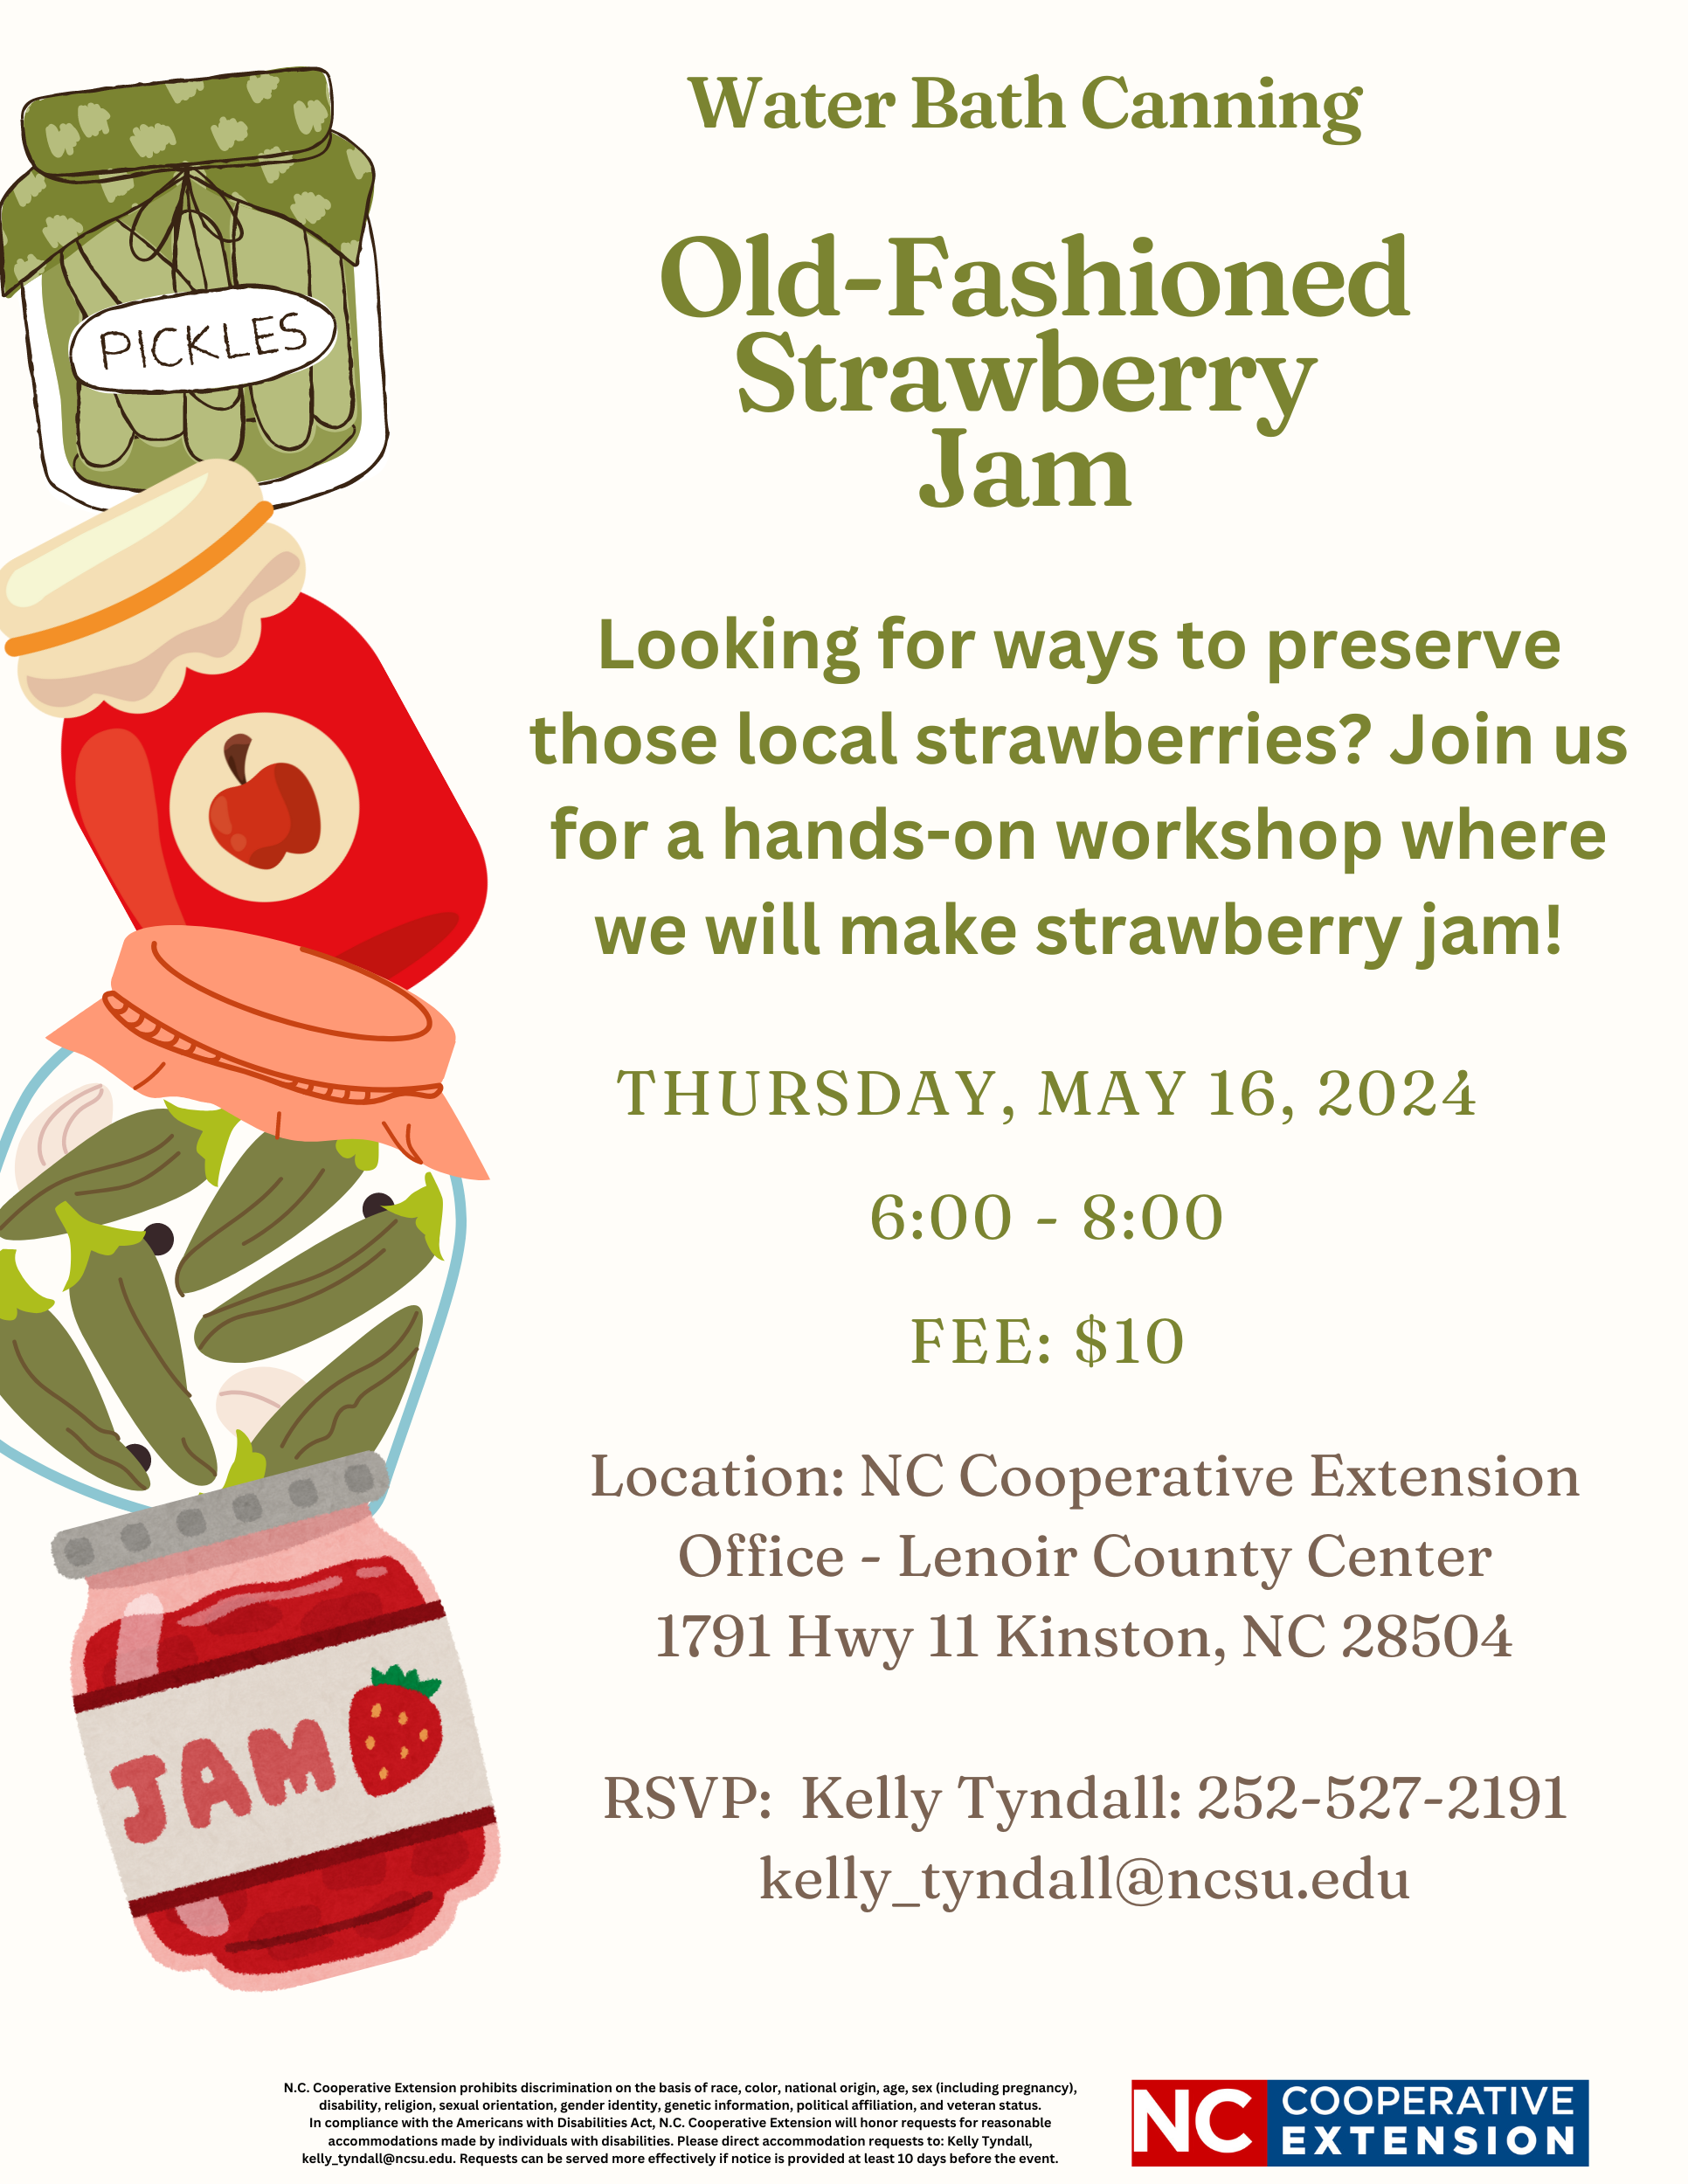 Water Bath Canning Class: Old-Fashioned Strawberry Jam. Thursday, May 16, 2024 from 6:00 p.m. - 8:00 p.m. Location: N.C. Cooperative Extension - Lenoir County Center. Fee: $10. RSVP: Kelly Tyndall 252-527-2191 or kelly_tyndall@ncsu.edu